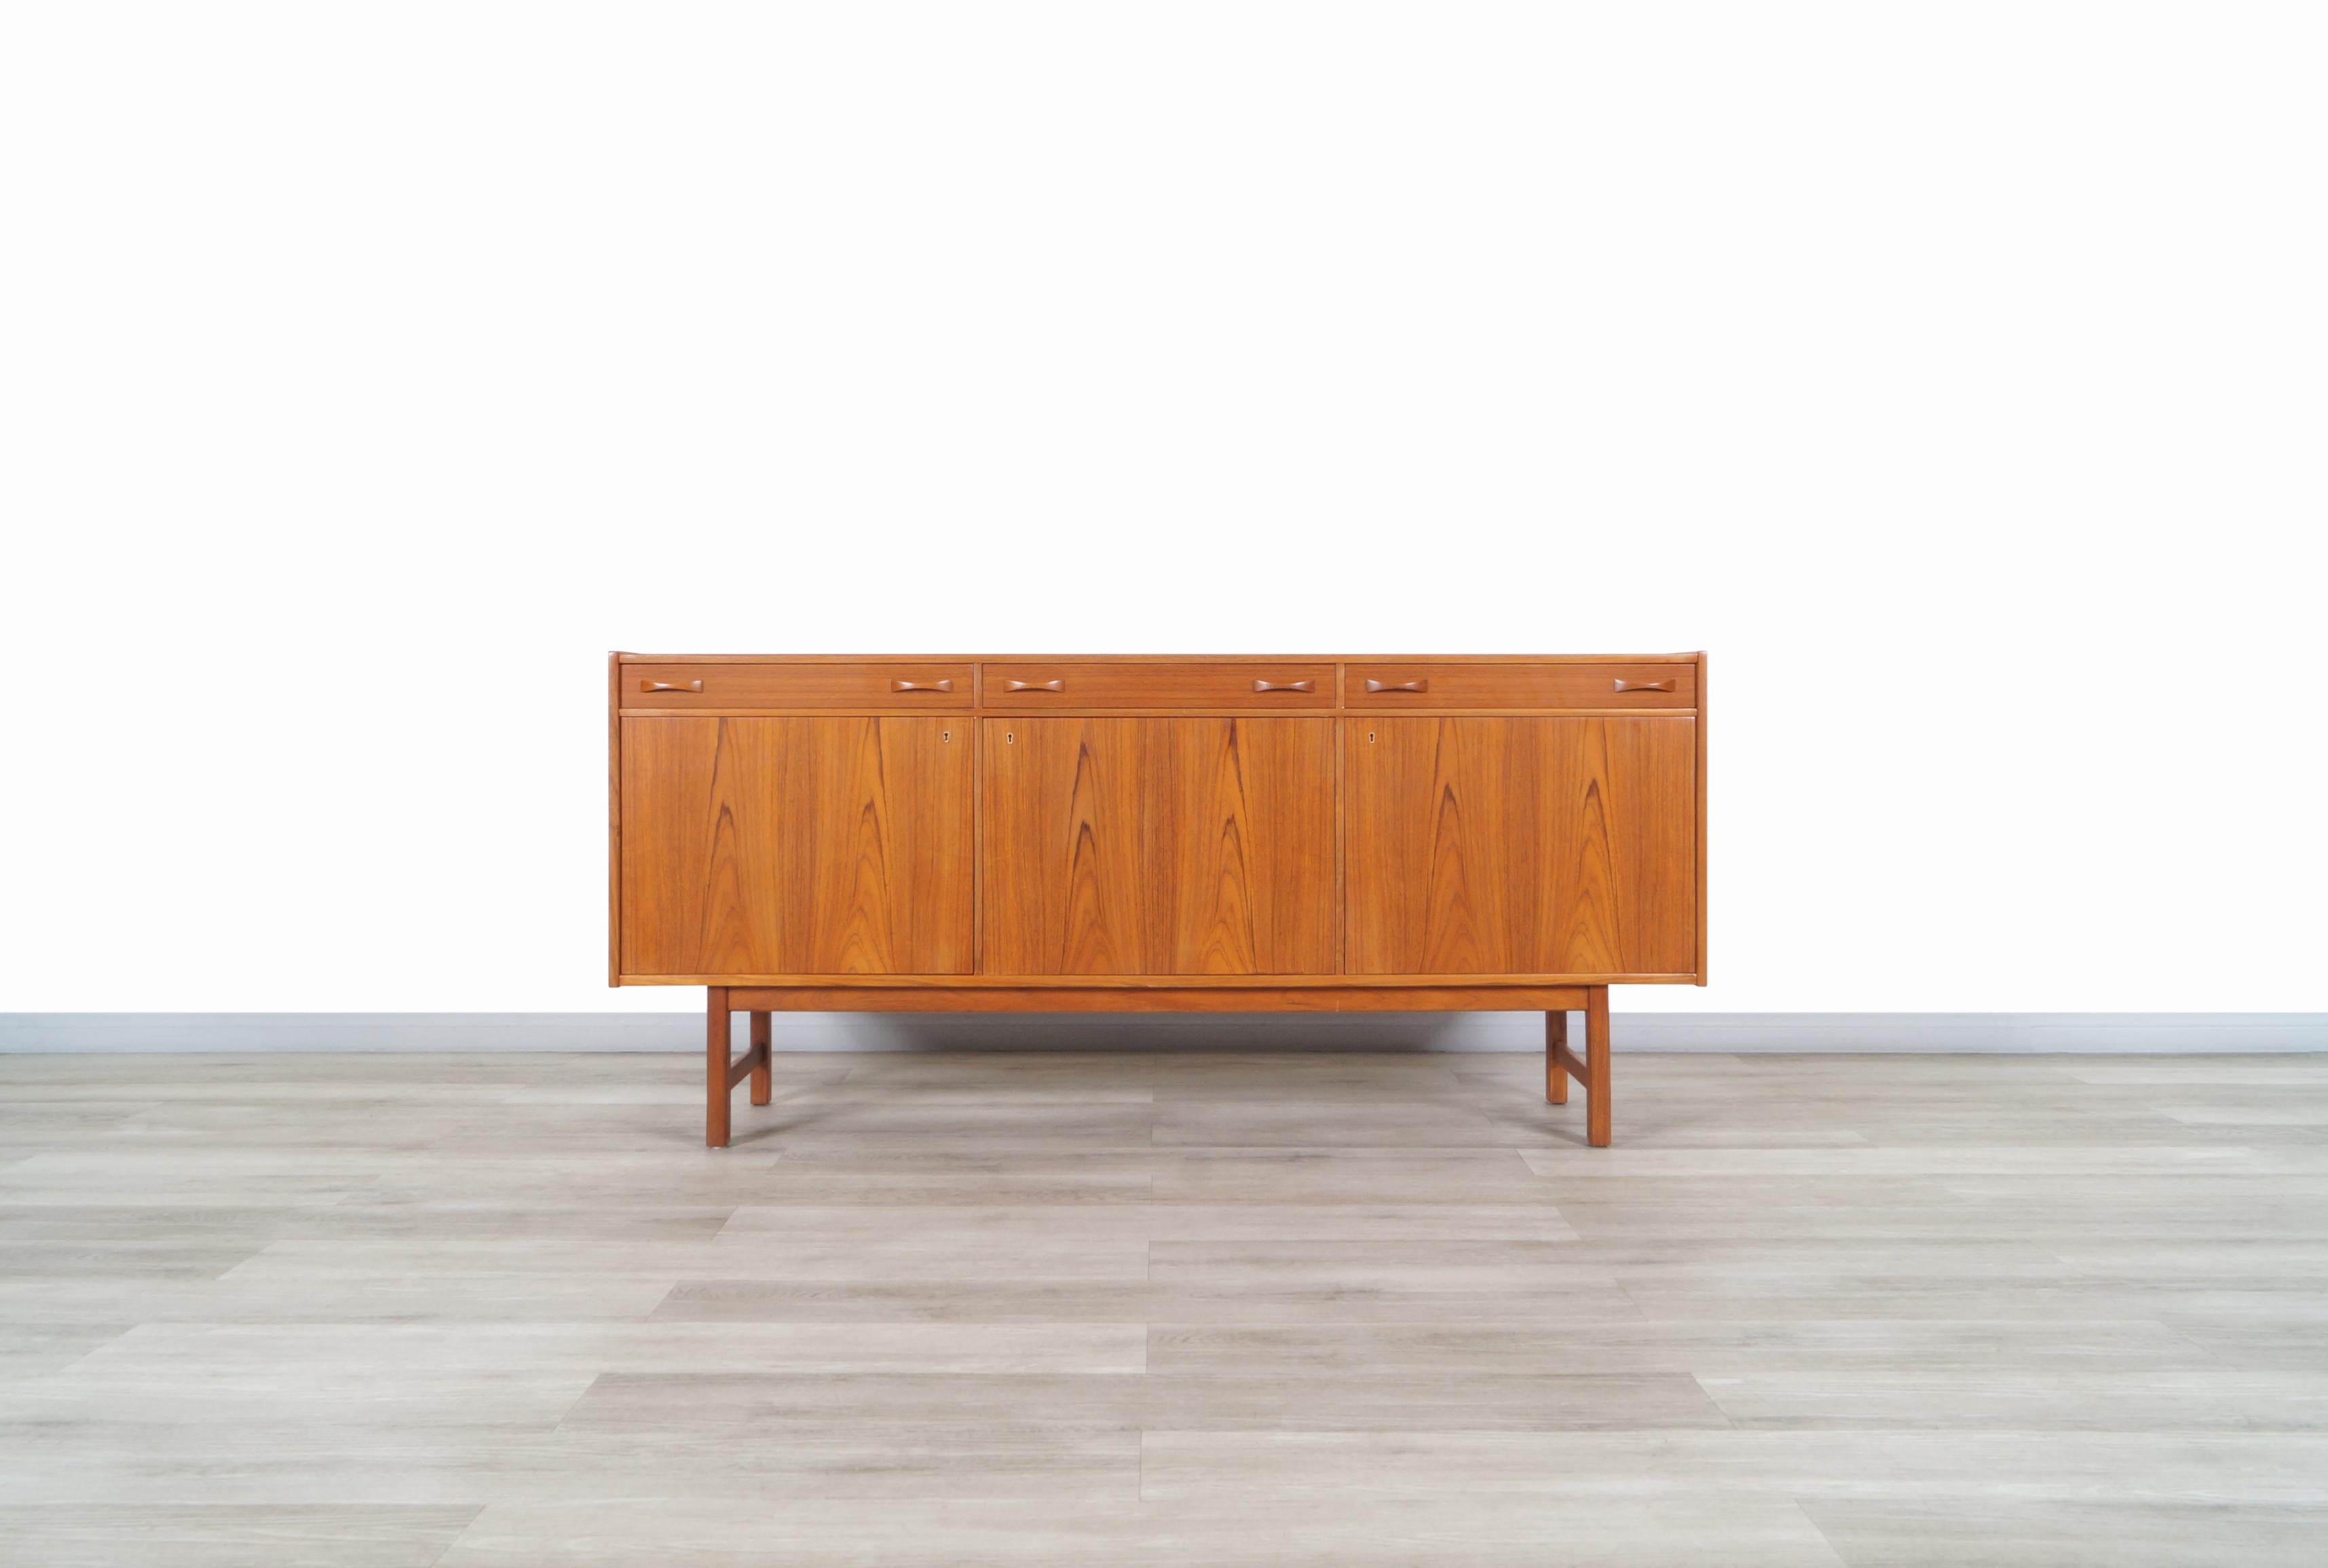 Fabulous midcentury teak sideboard designed by Tage Olofsson for Ulferts Møbler in Sweden, circa 1960s. This sideboard is made from the highest quality teak wood. It has an elegant and characteristic Scandinavian design. The upper part features 3